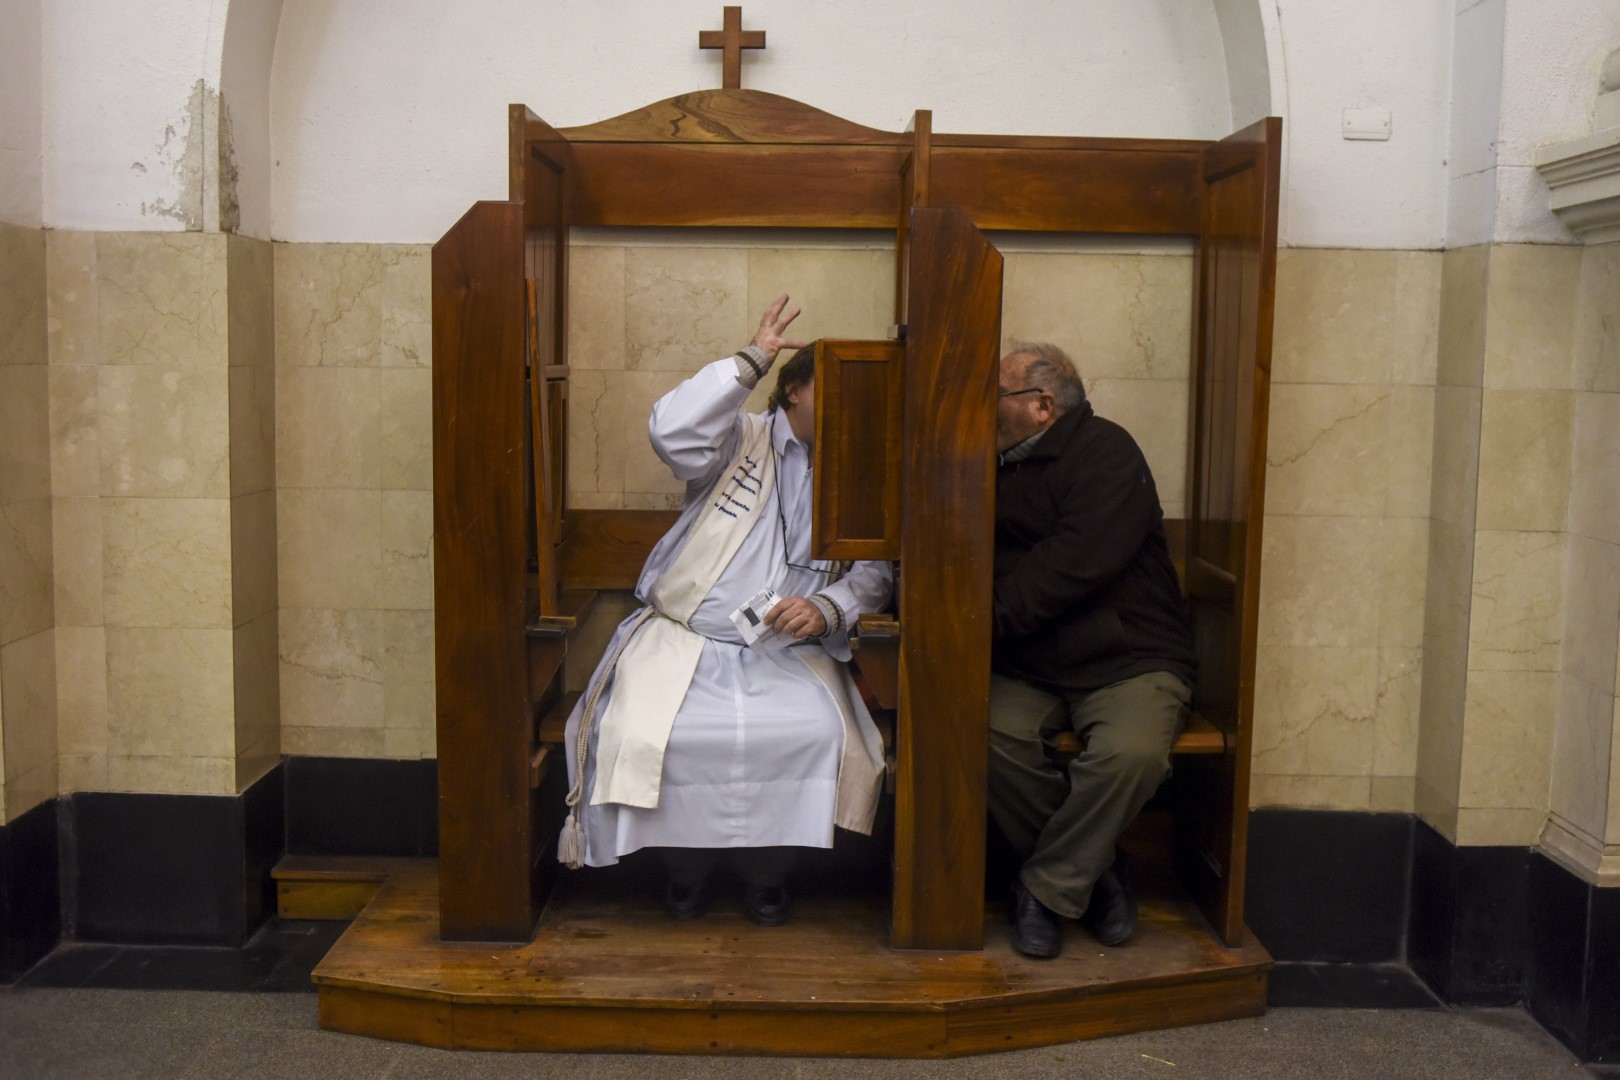 Priests must violate Seal of Confessional, inquiry told - Catholic Herald.